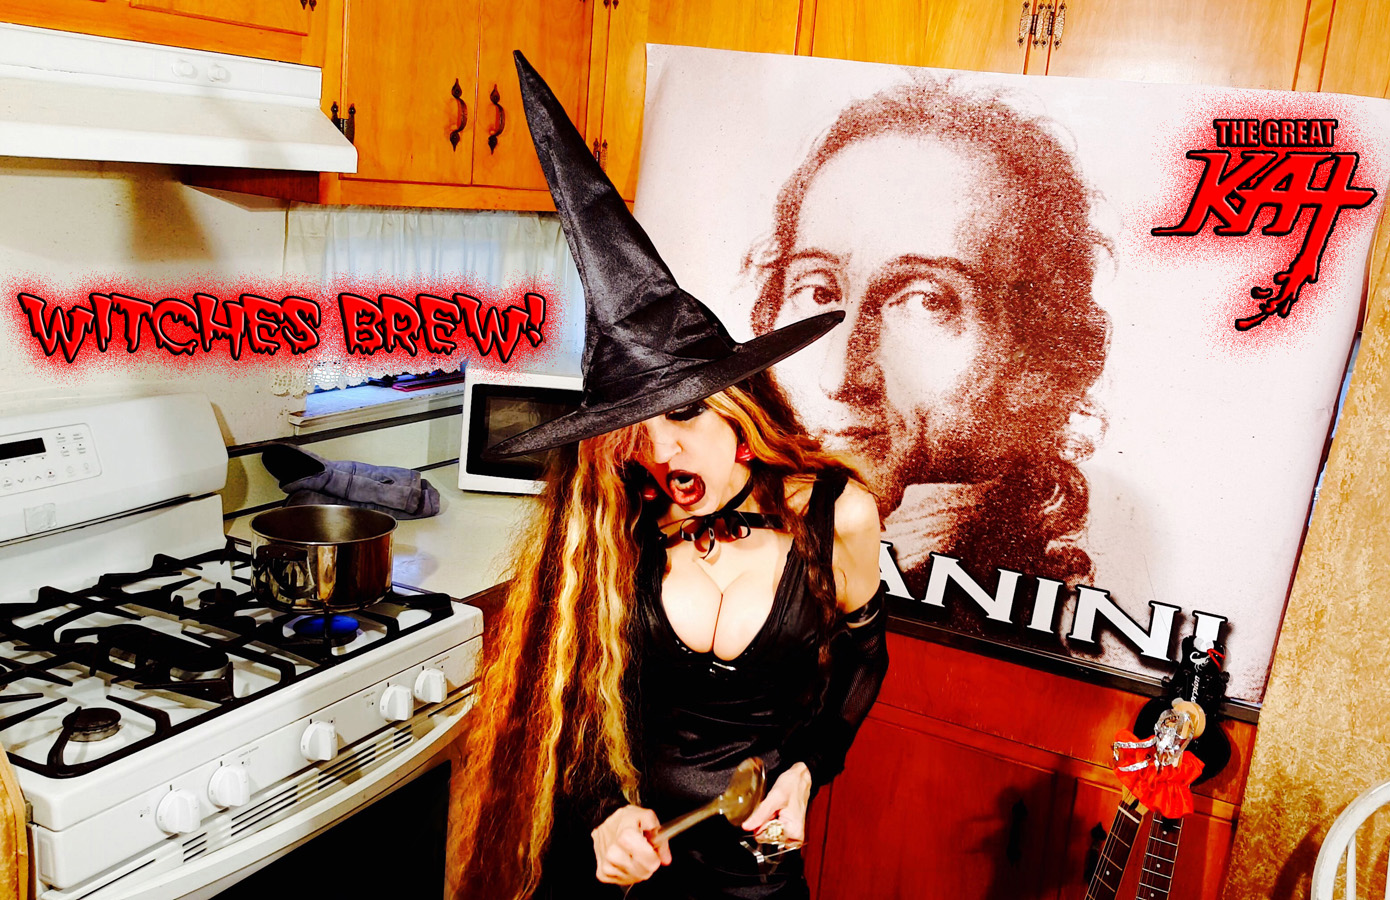 WITCHES BREW!!! From CHEF GREAT KAT COOKS PAGANINI'S RAVIOLI!